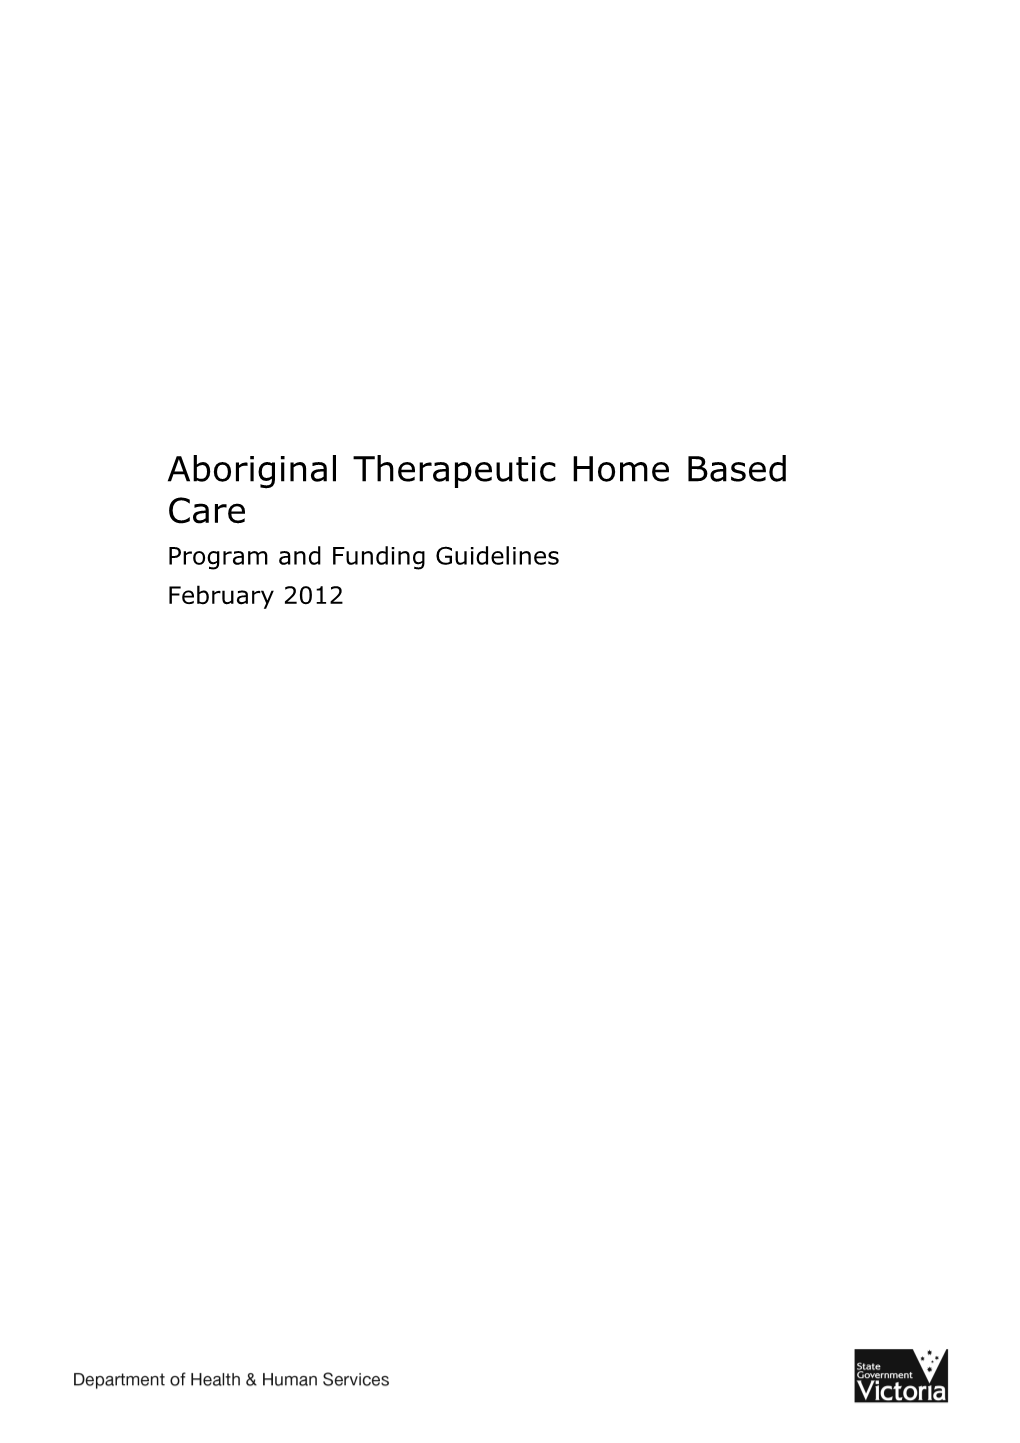 Aboriginal Therapeutic Home Based Care: Program and Funding Guidelines